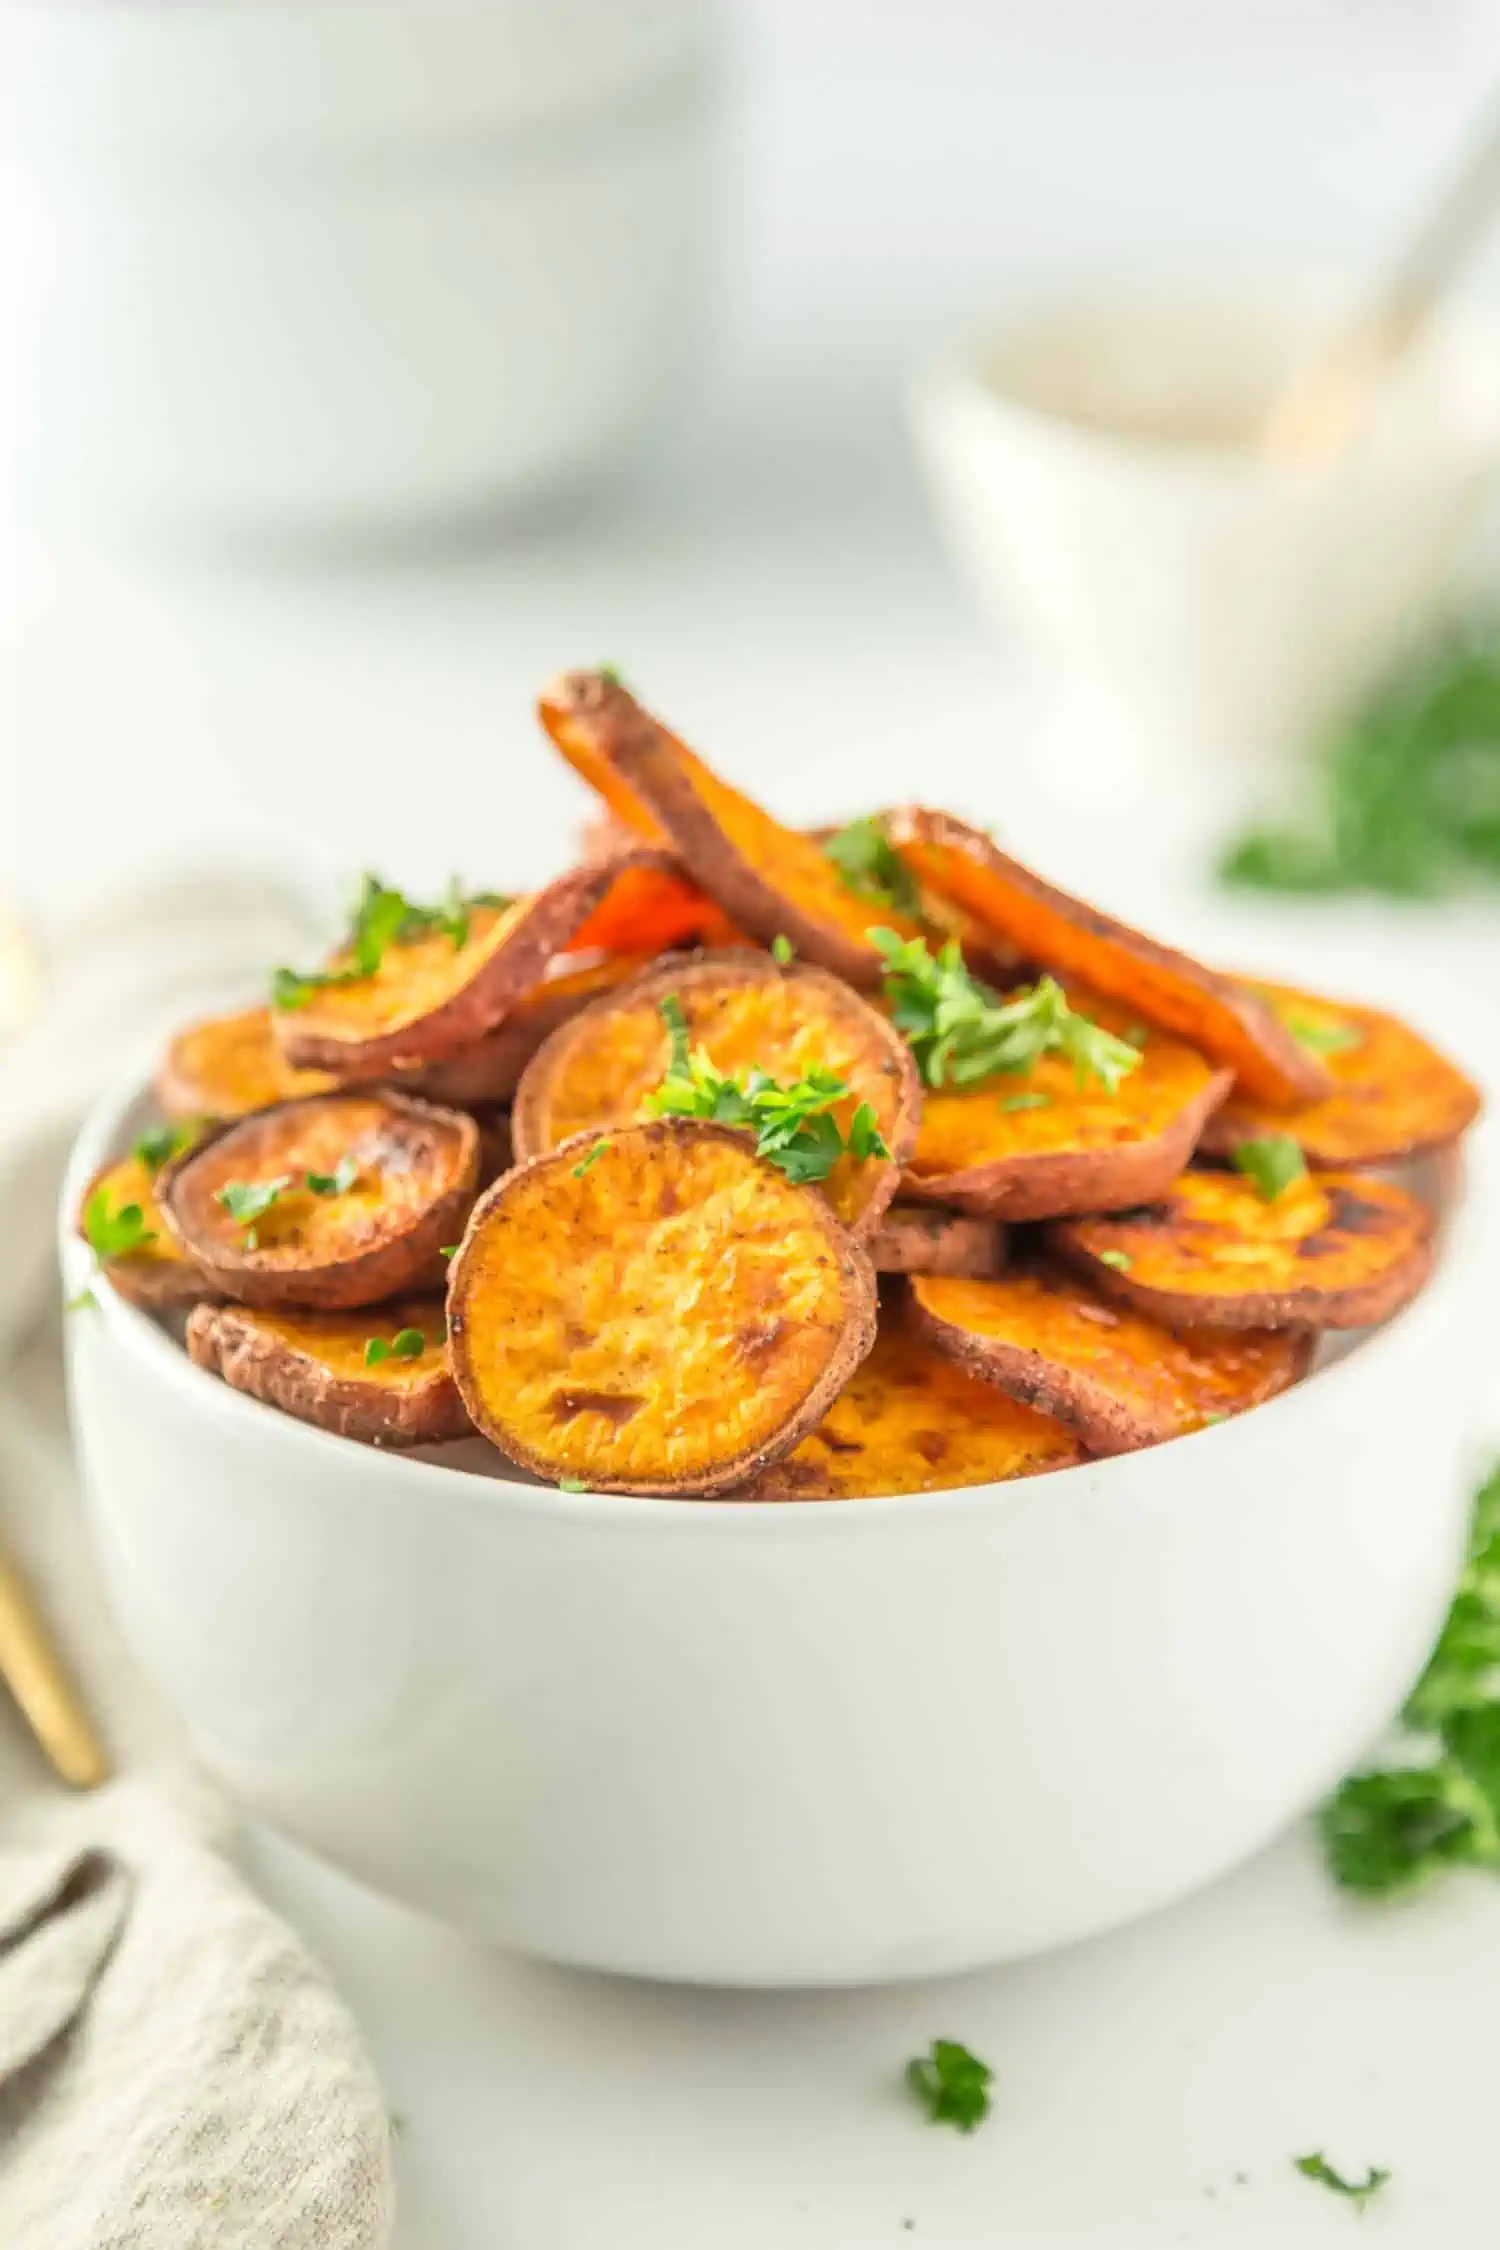 Roasted Baked Sweet Potato Slices in a white bowl with parsley garnish